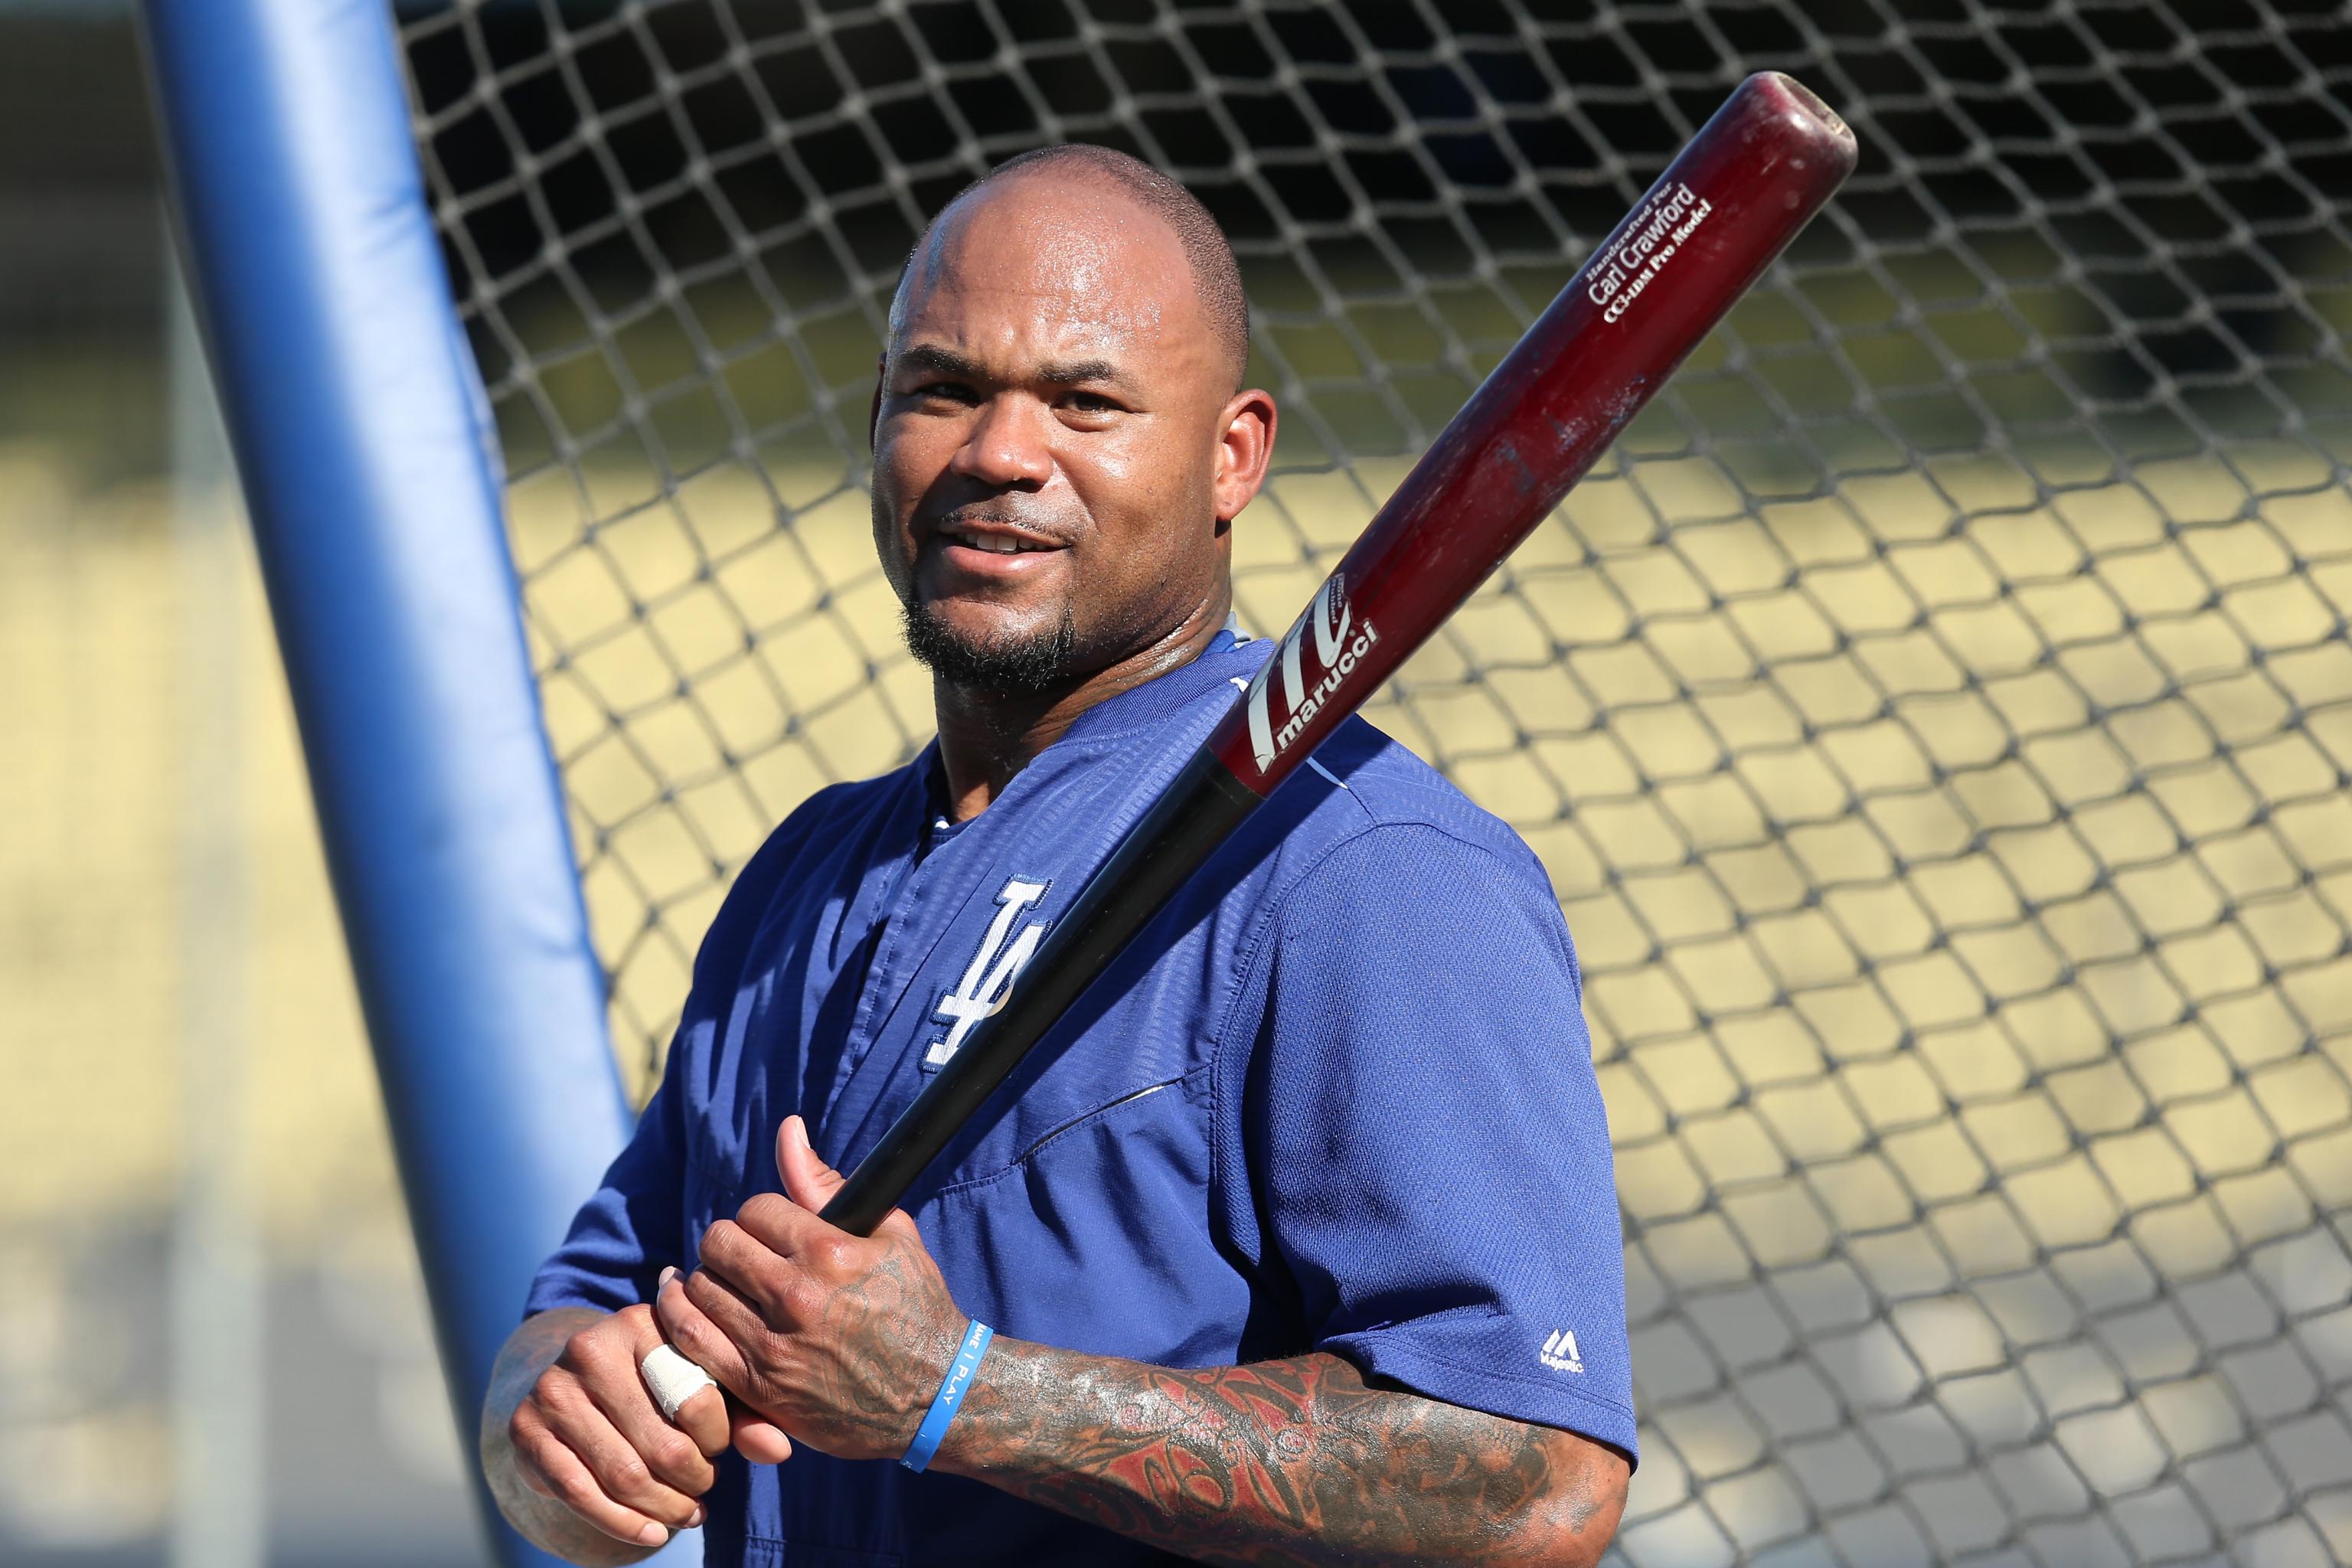 Fan who allegedly yelled racial slur at Carl Crawford is a police